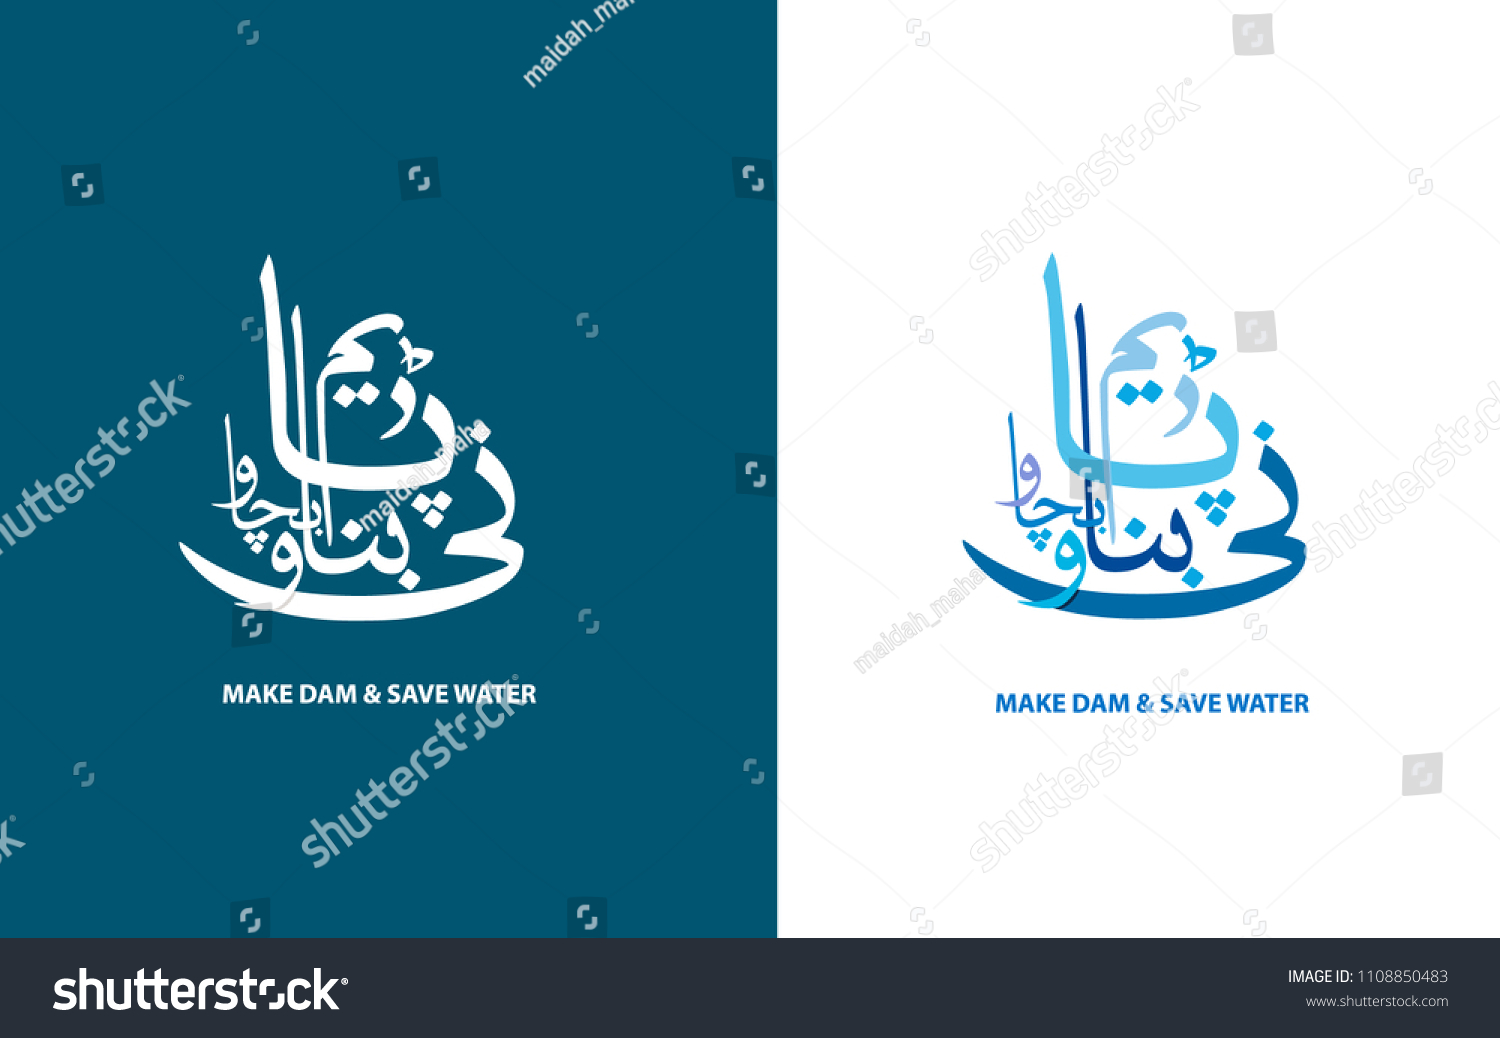 Stock Vector Make Dam And Save Water Written In Urdu Language For Making Dams And Saving Of Water Campaigns In 1108850483 